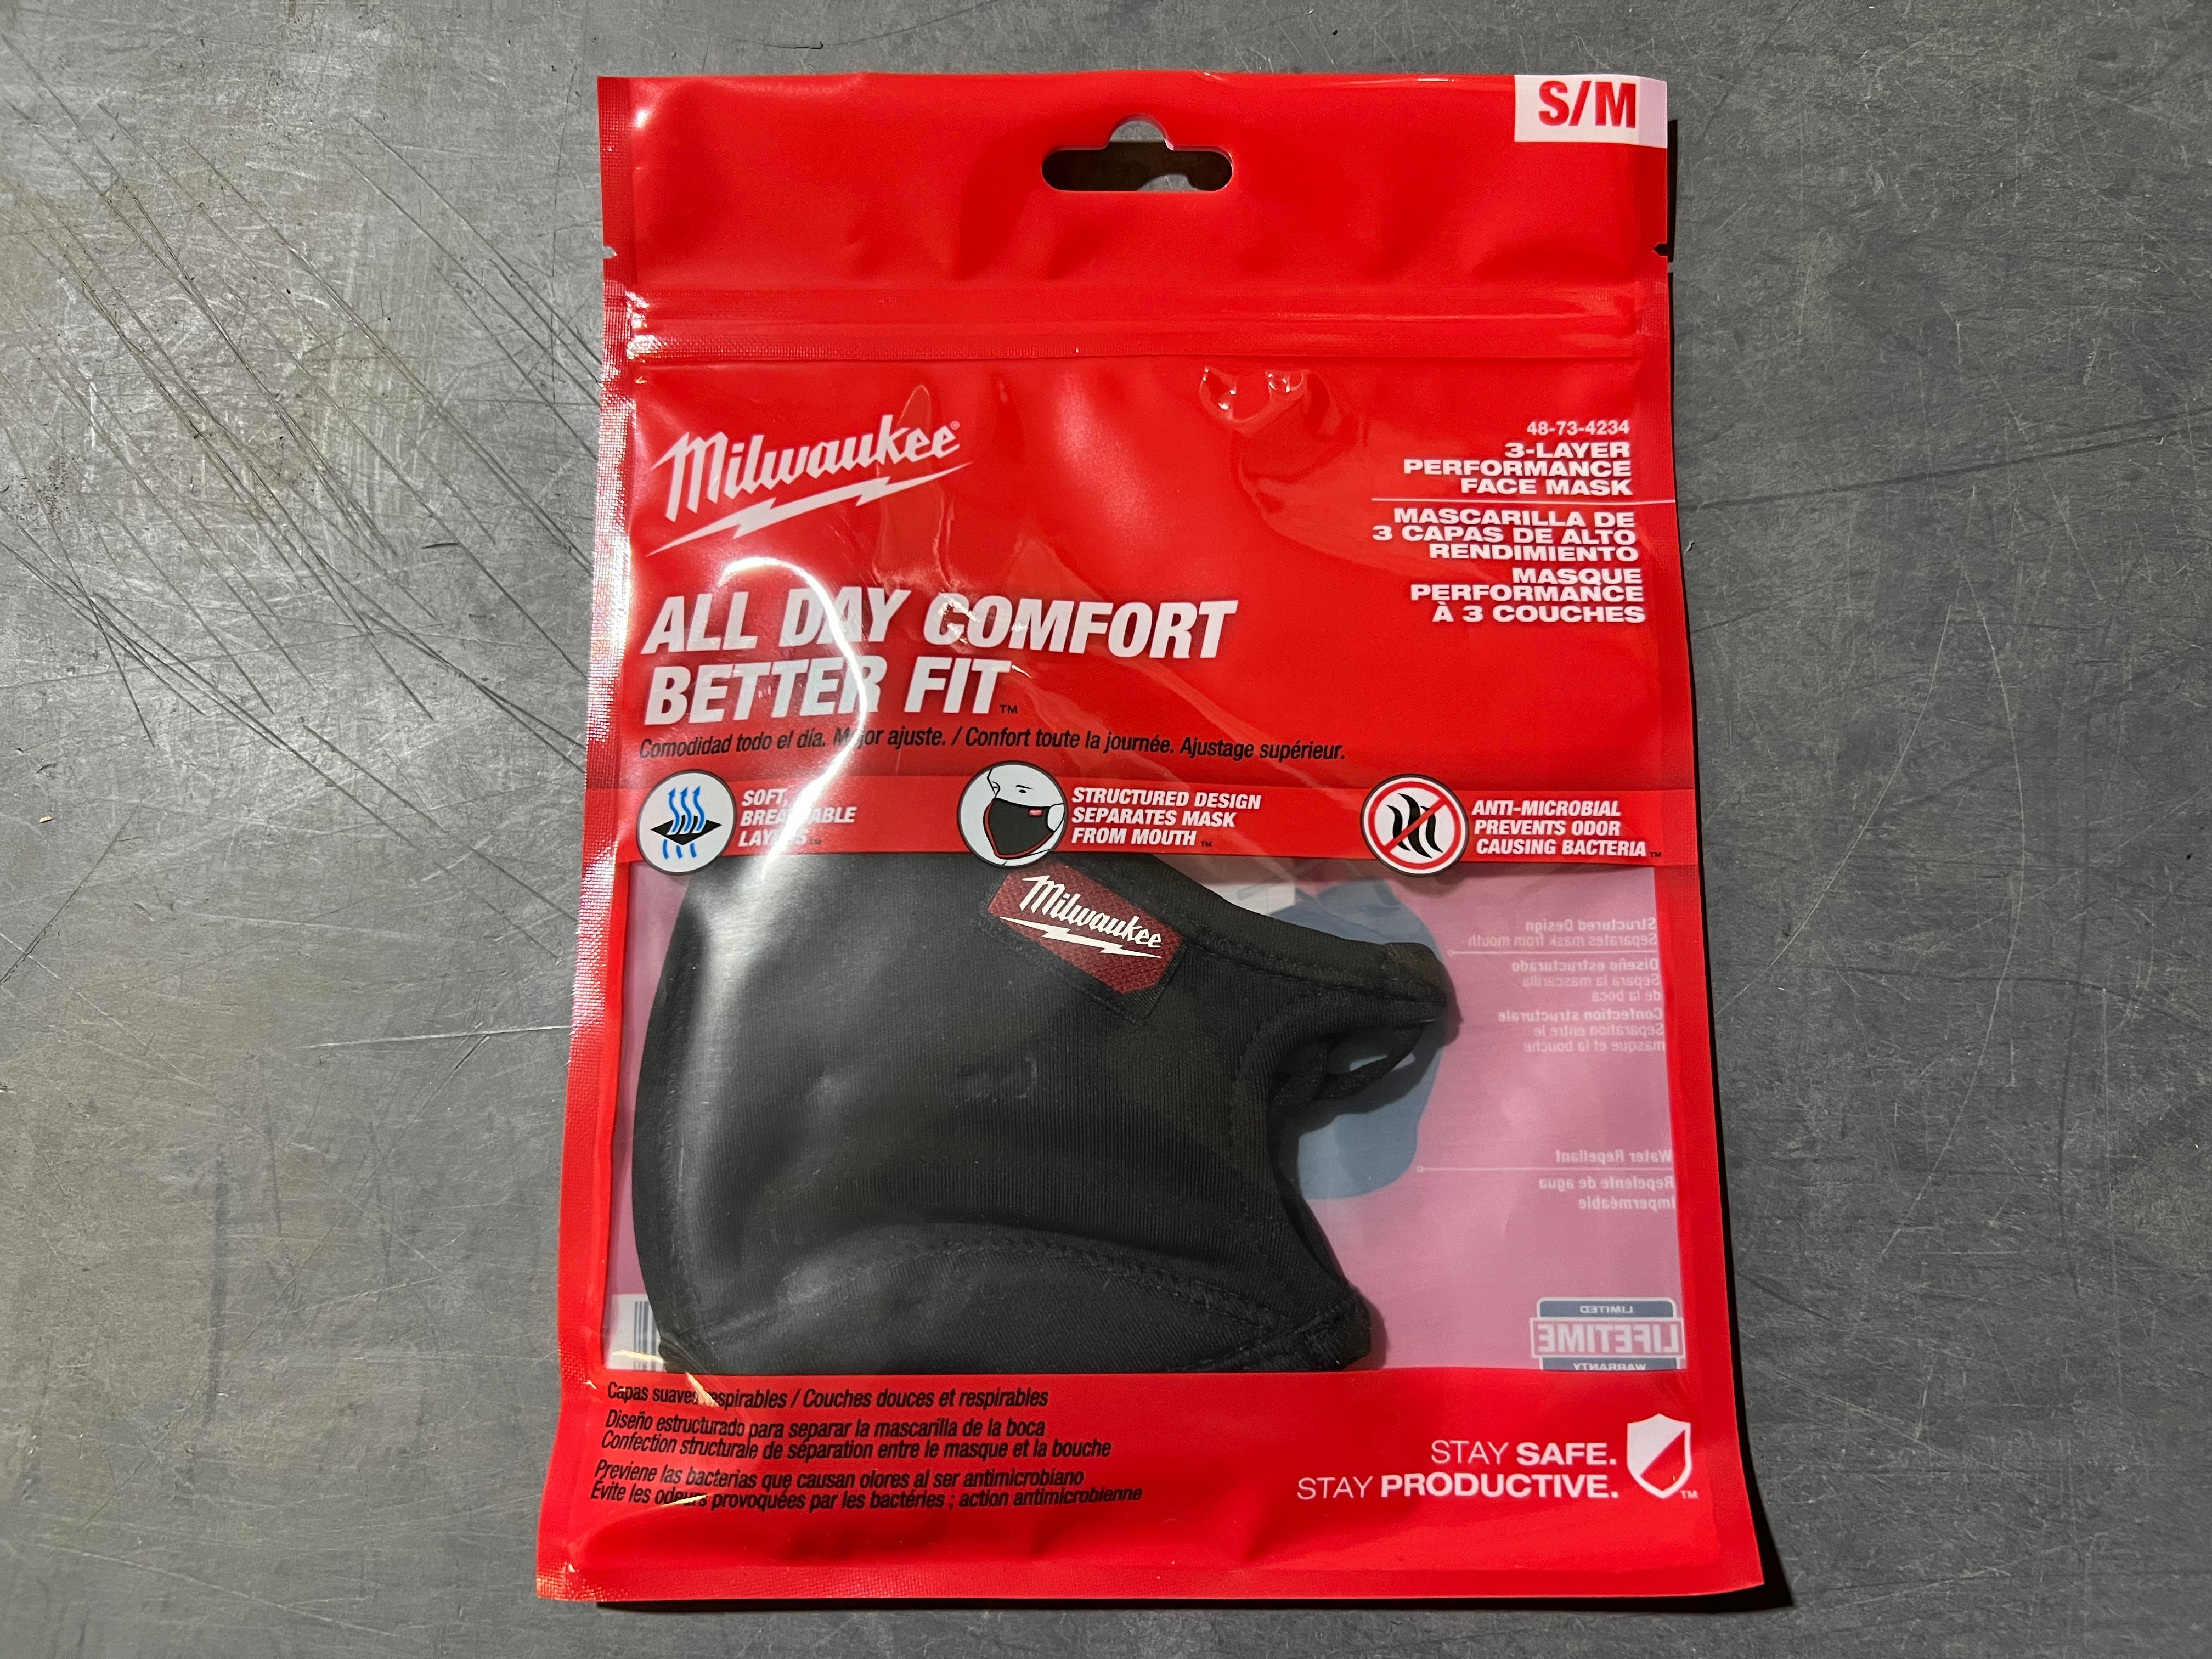 Milwaukee 48-73-4236 3-layer Dust Covering Black